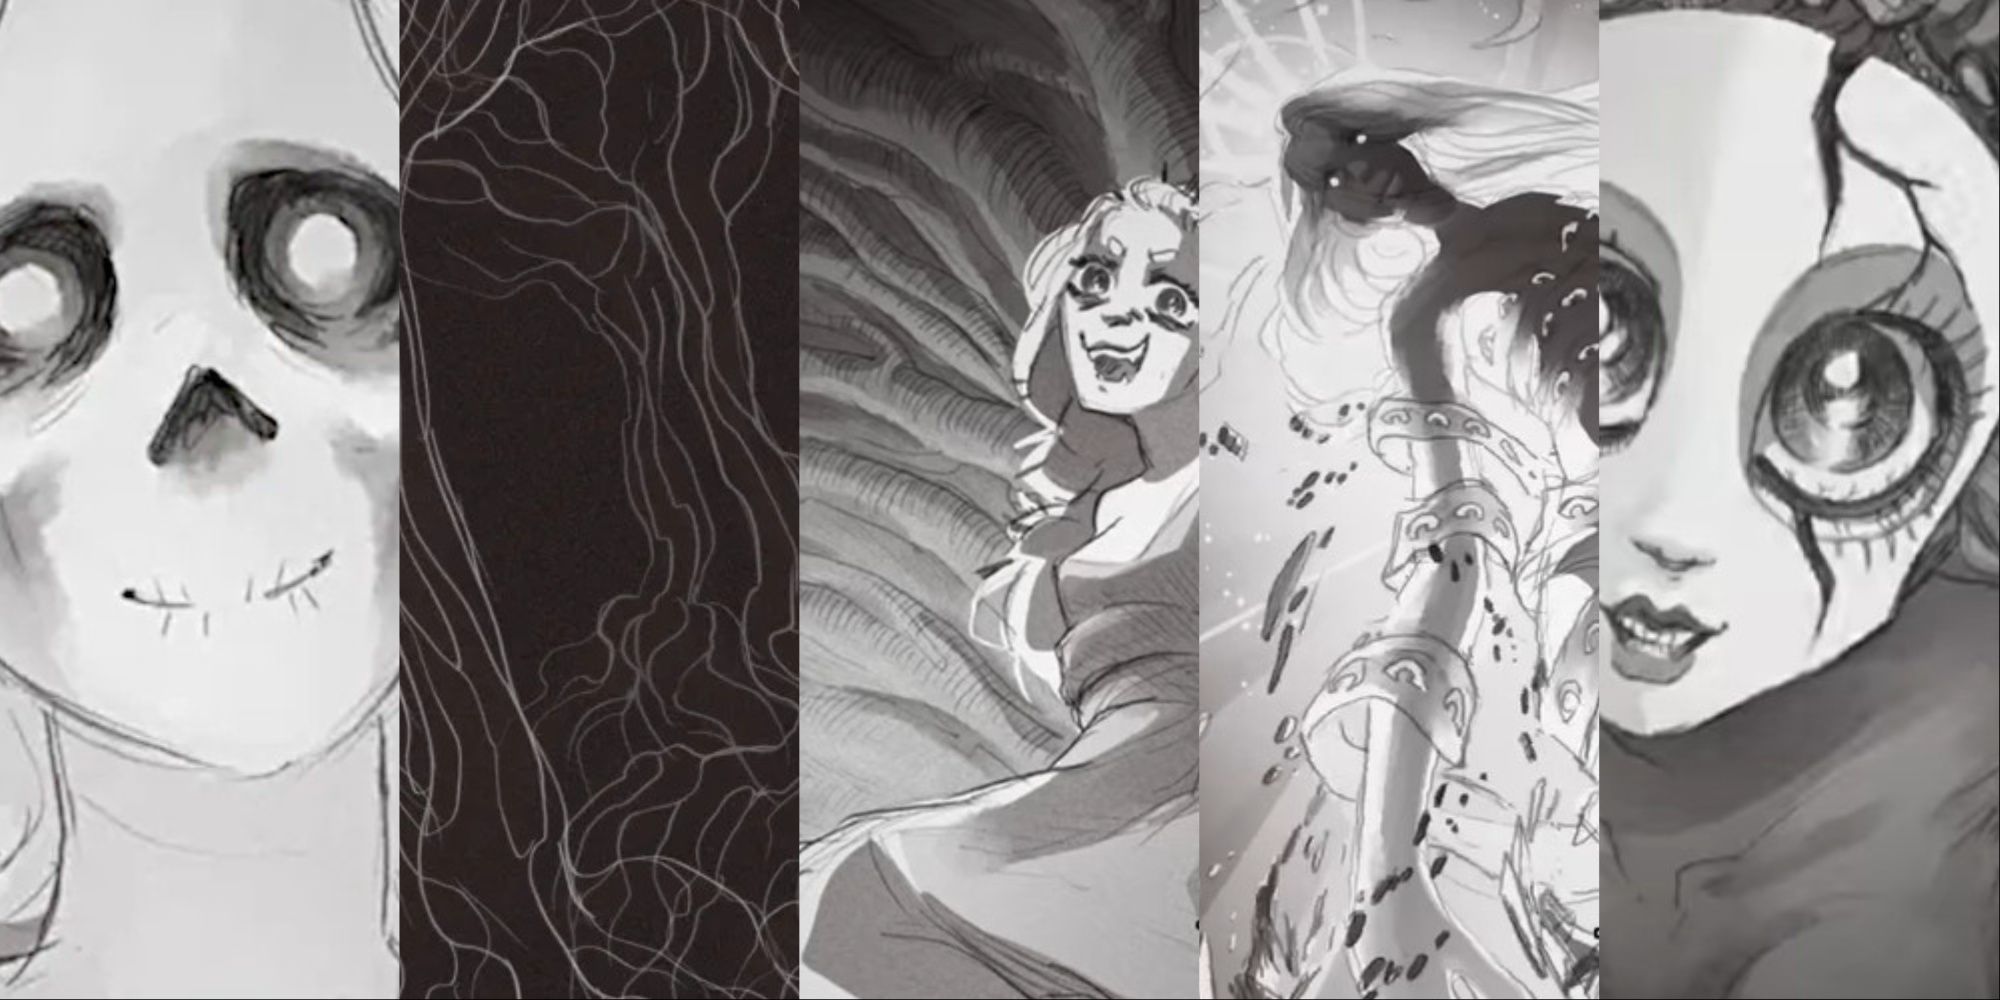 From left to right: The Grey, the Wild, the Witch, the Apotheosis, and the Nightmare